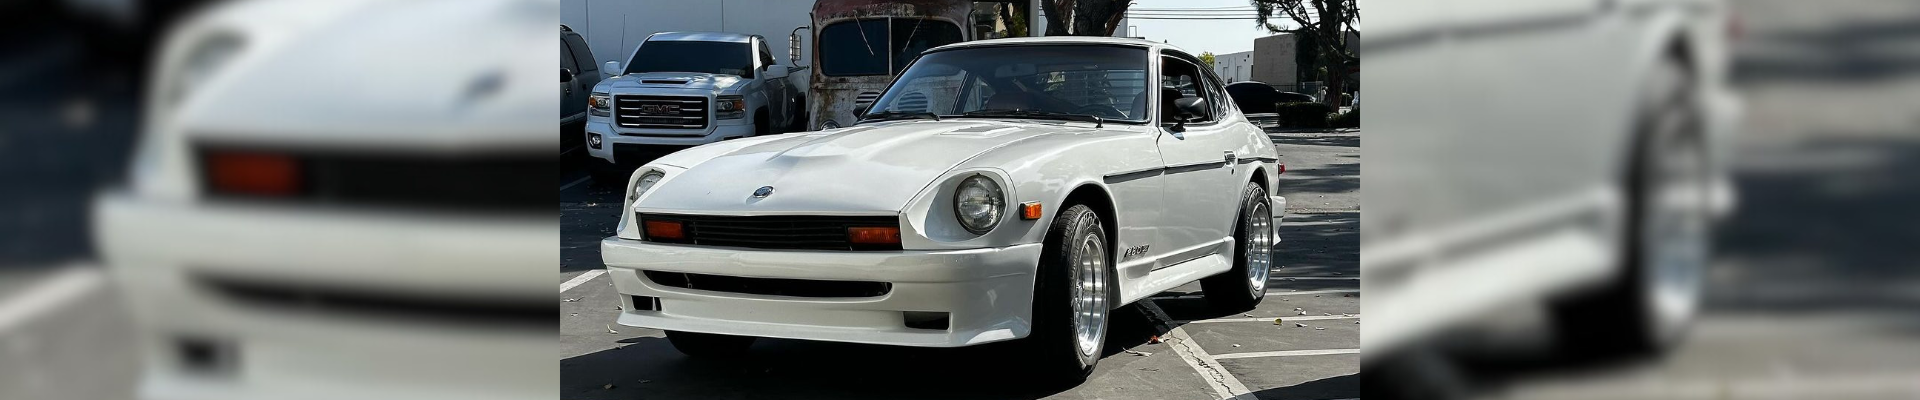 nissan-280Z-gallery-4.png